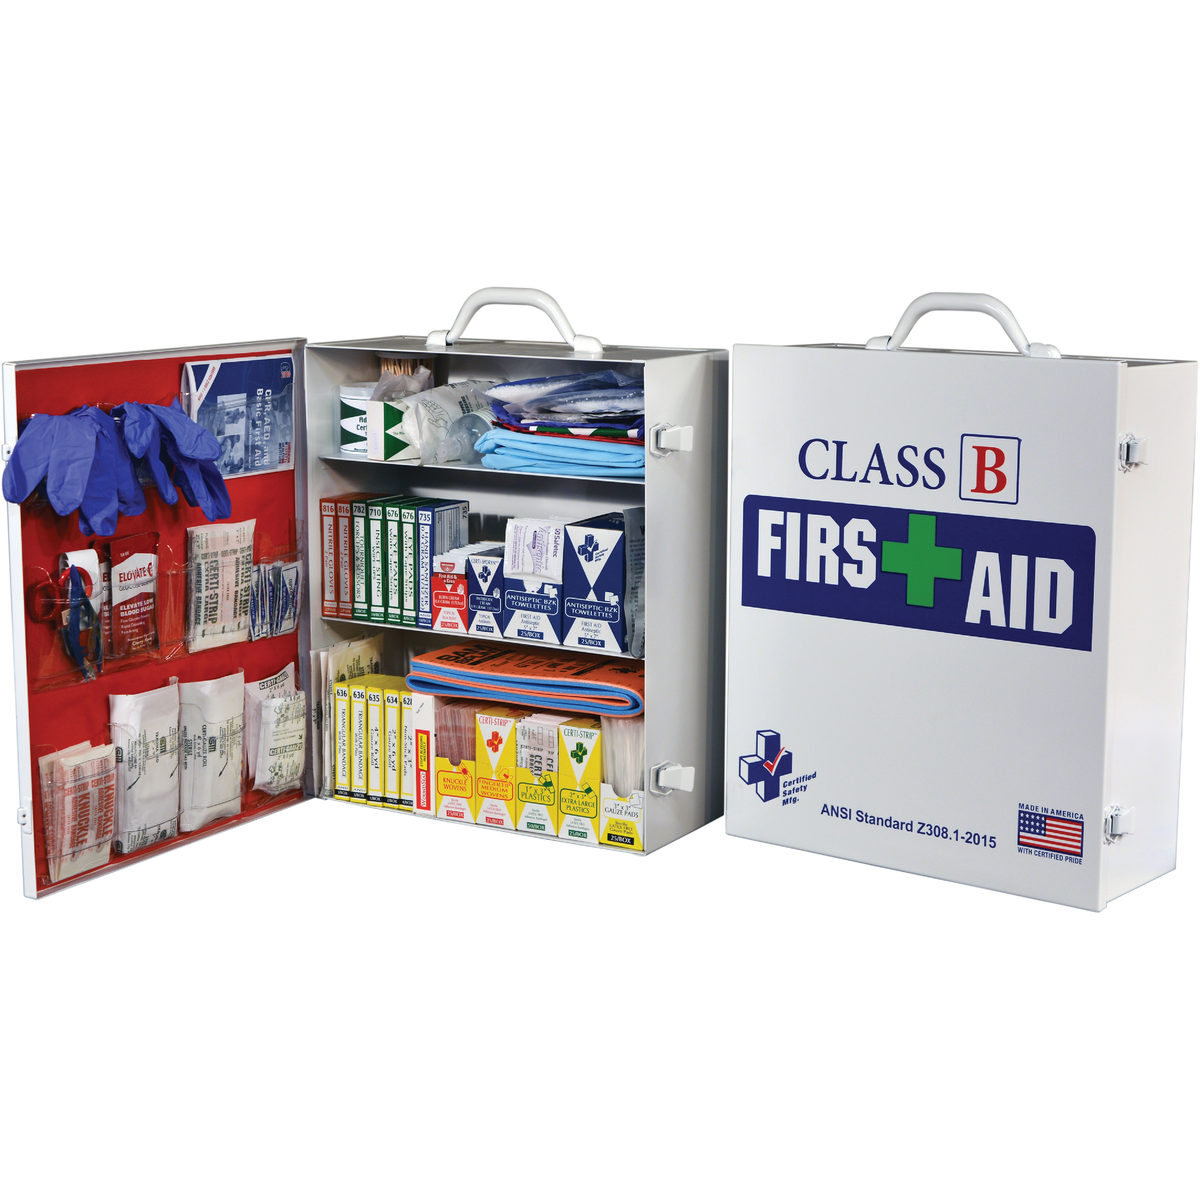 ANSI Certified & Personal First Aid Kits